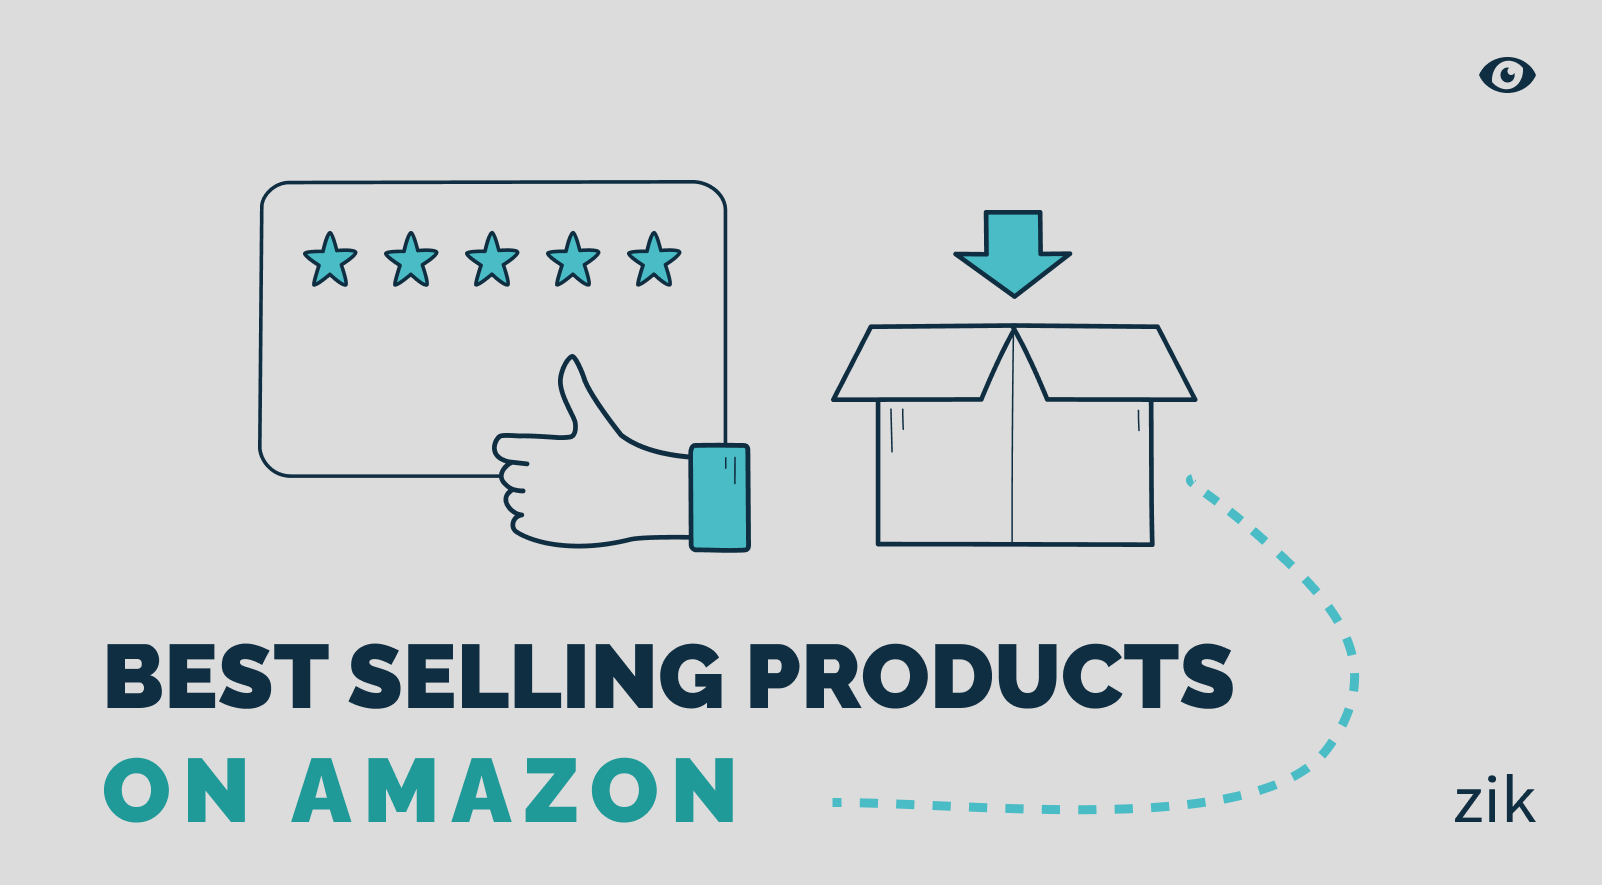 Best selling products on Amazon